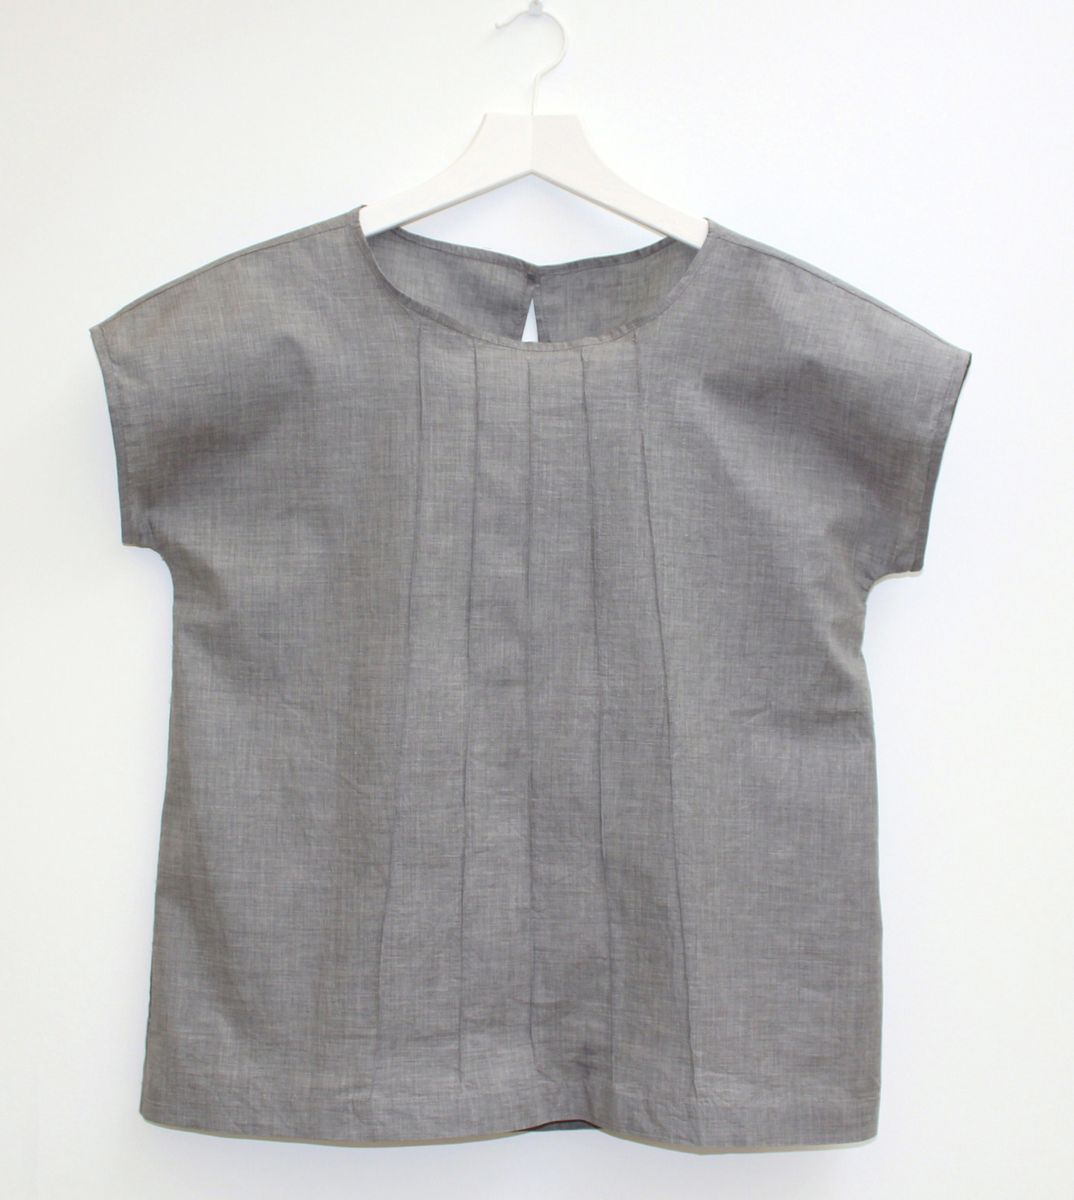 CK - flannel grey cotton top with pintuck details